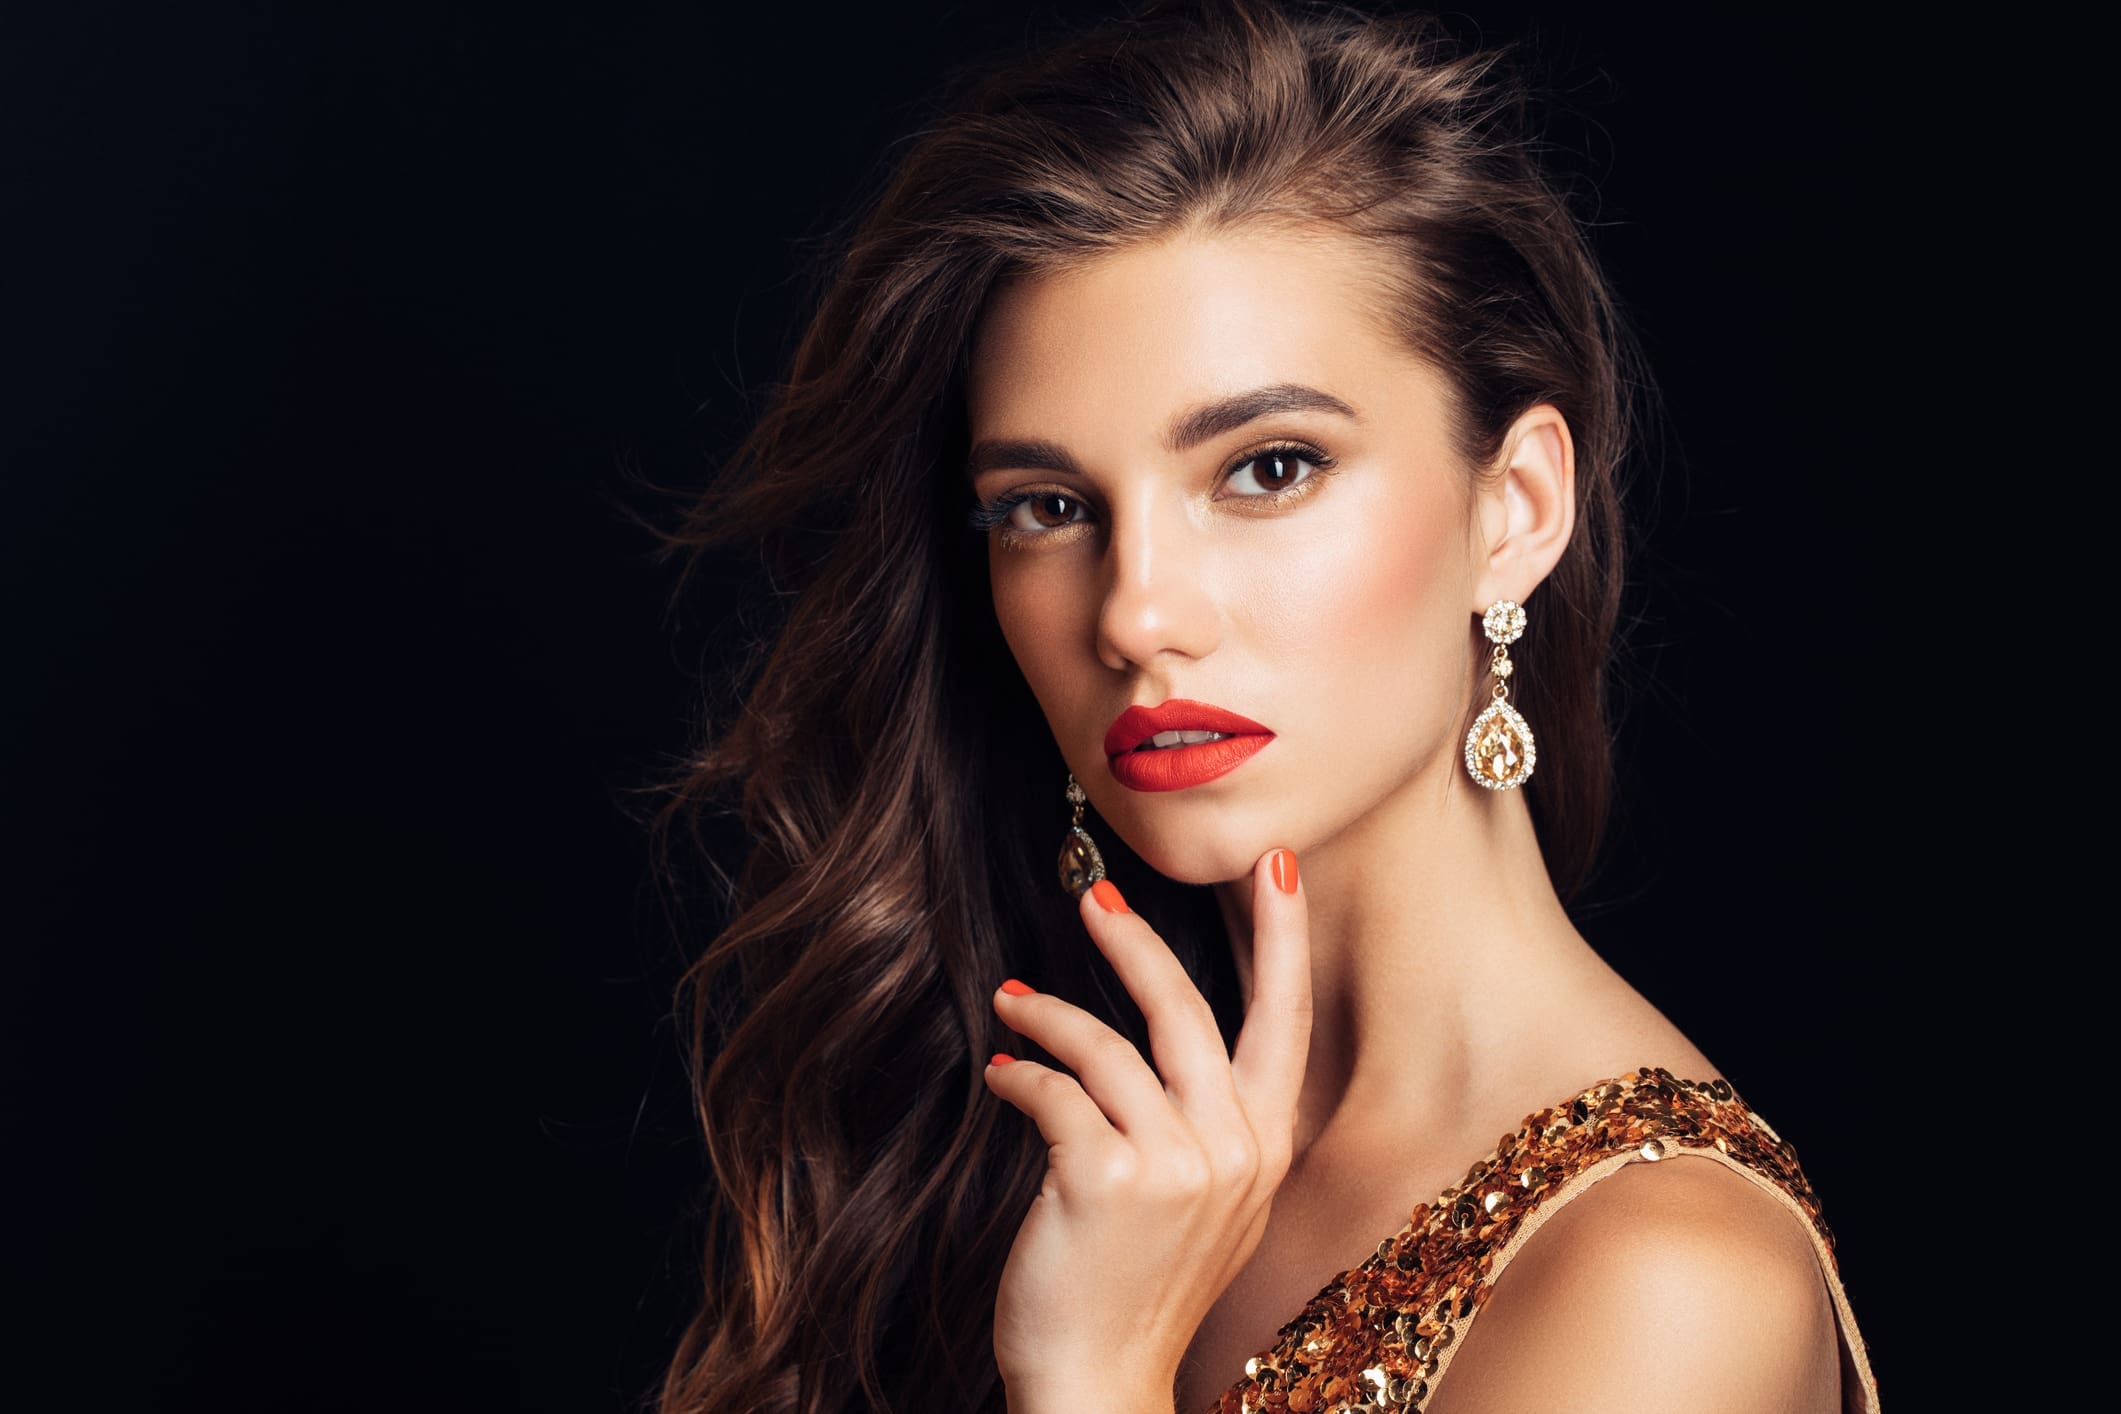 Dermal Fillers and Injectables in West Palm Beach and Jupiter, FL